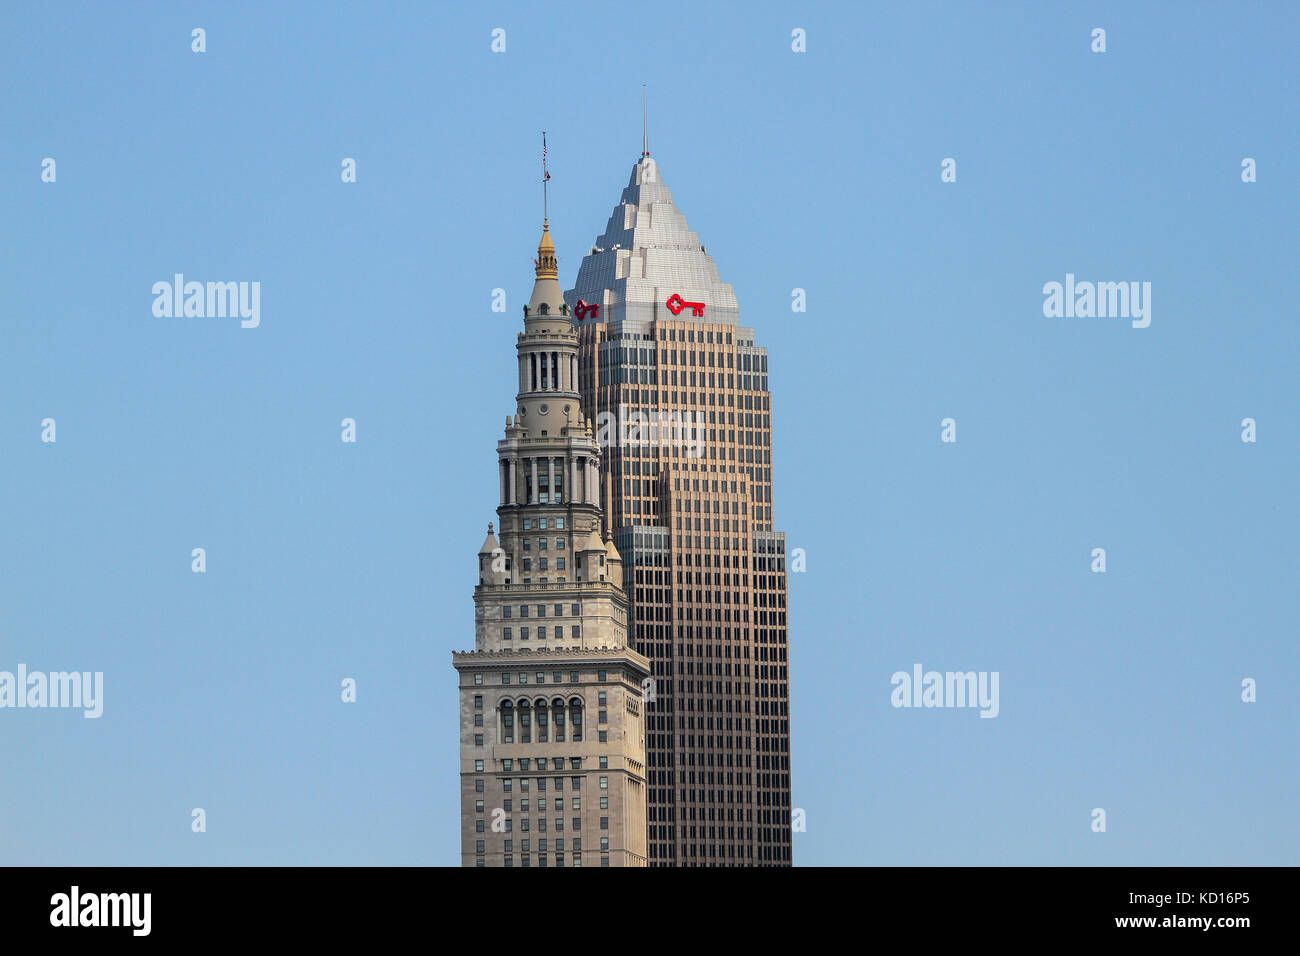 Key Tower, completed in 1991 (right) and Terminal Tower, completed in 1930 (left) are the tallest and second tallest buildings, respectively, in Cleve Stock Photo